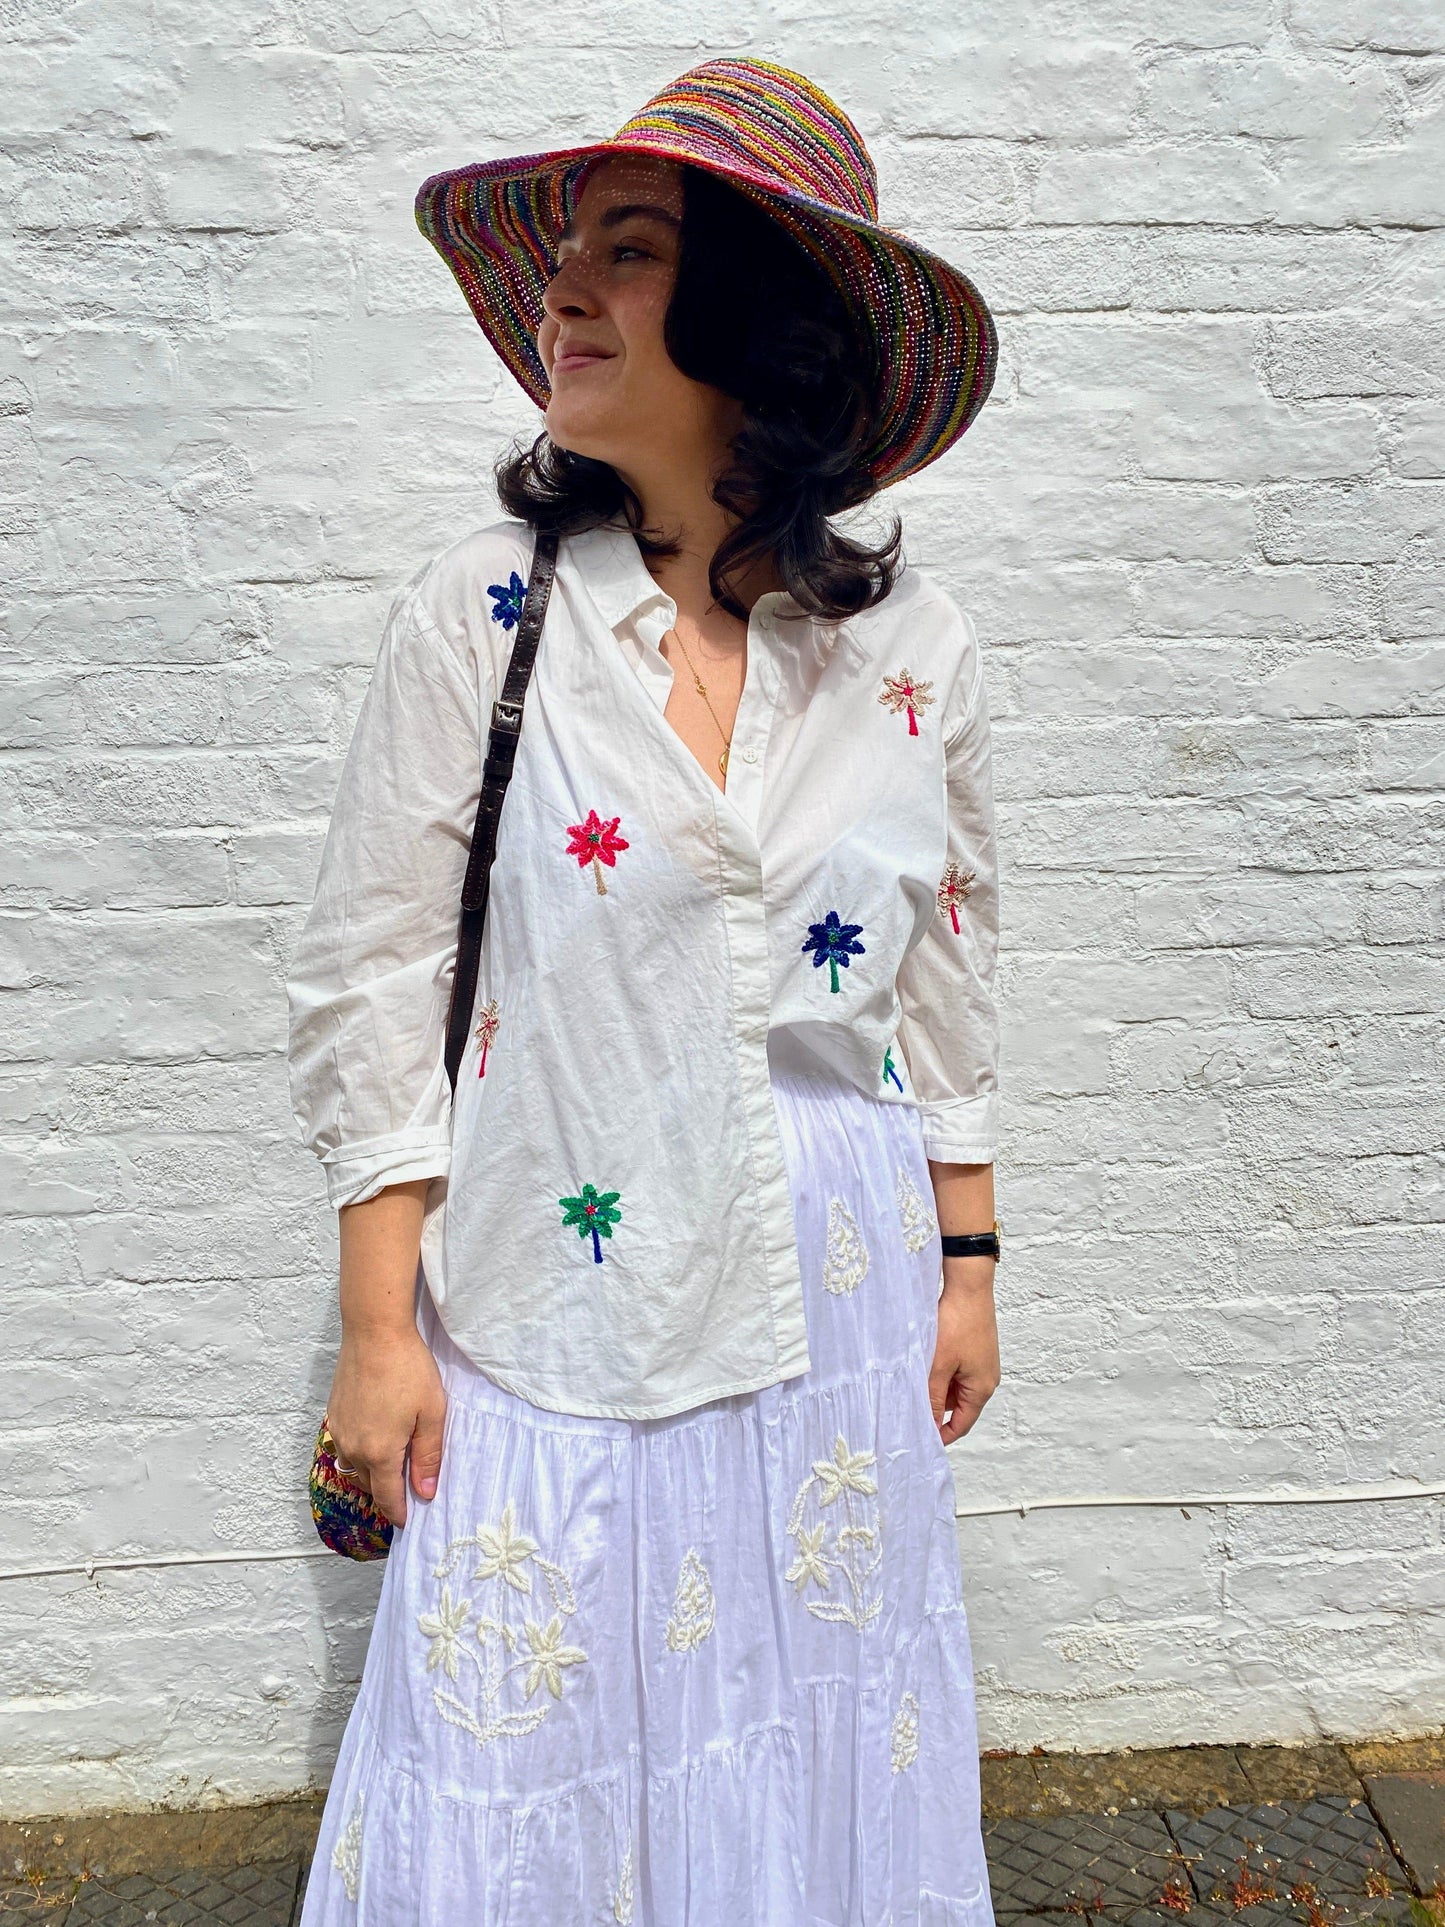 Vilagallo Tops Sophie Embroidered Shirt